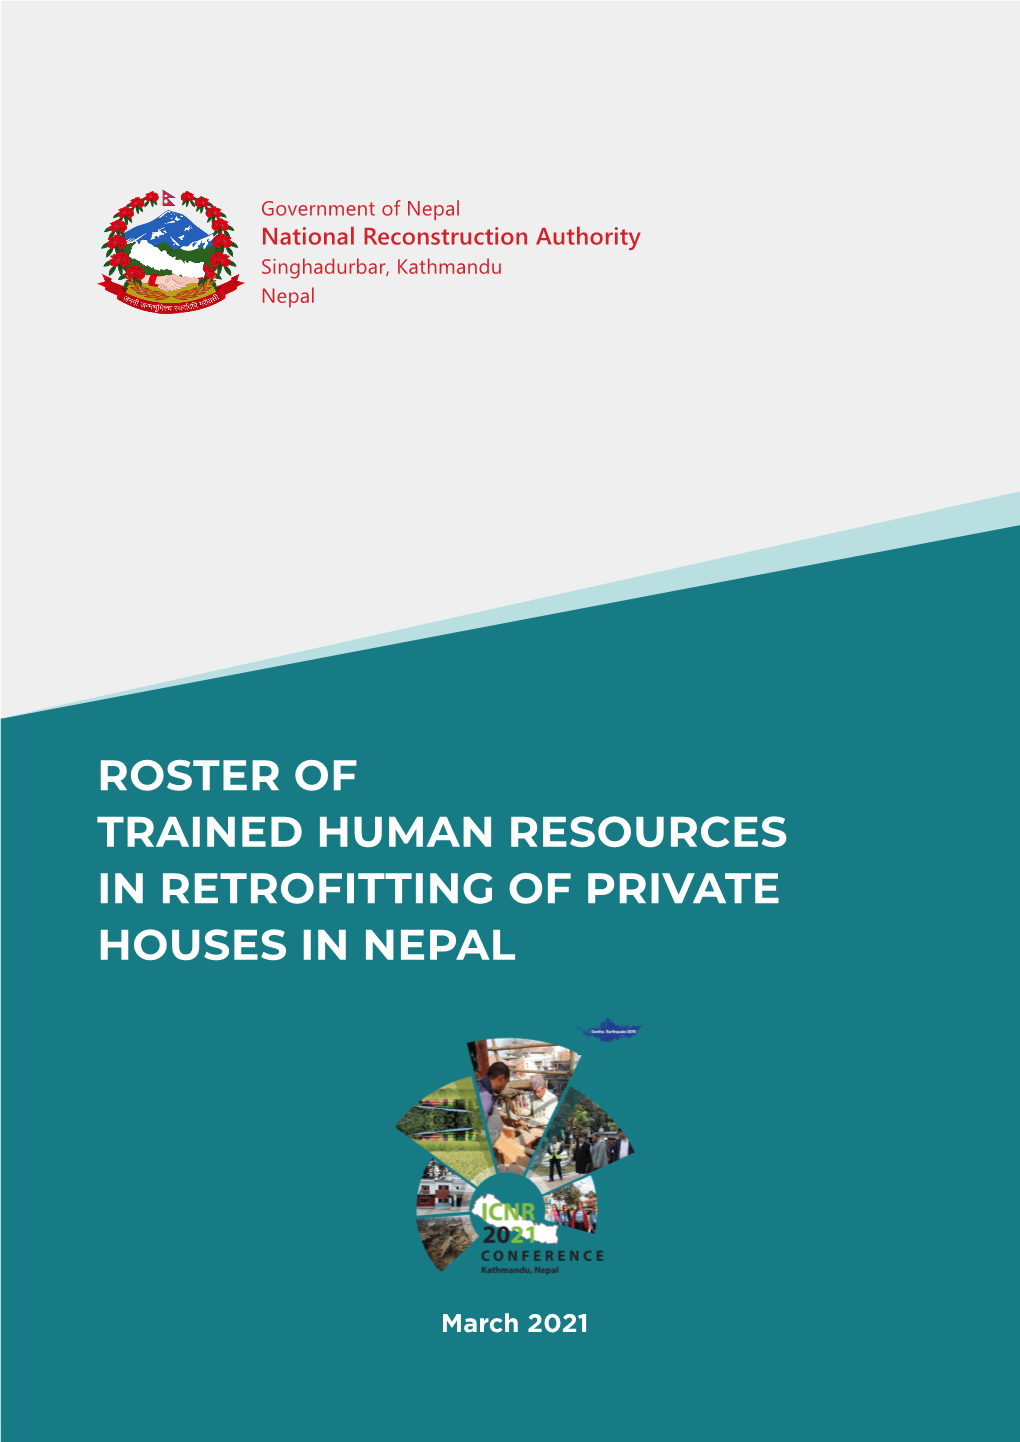 Roster of Trained Human Resources in Retrofitting of Private Houses in Nepal